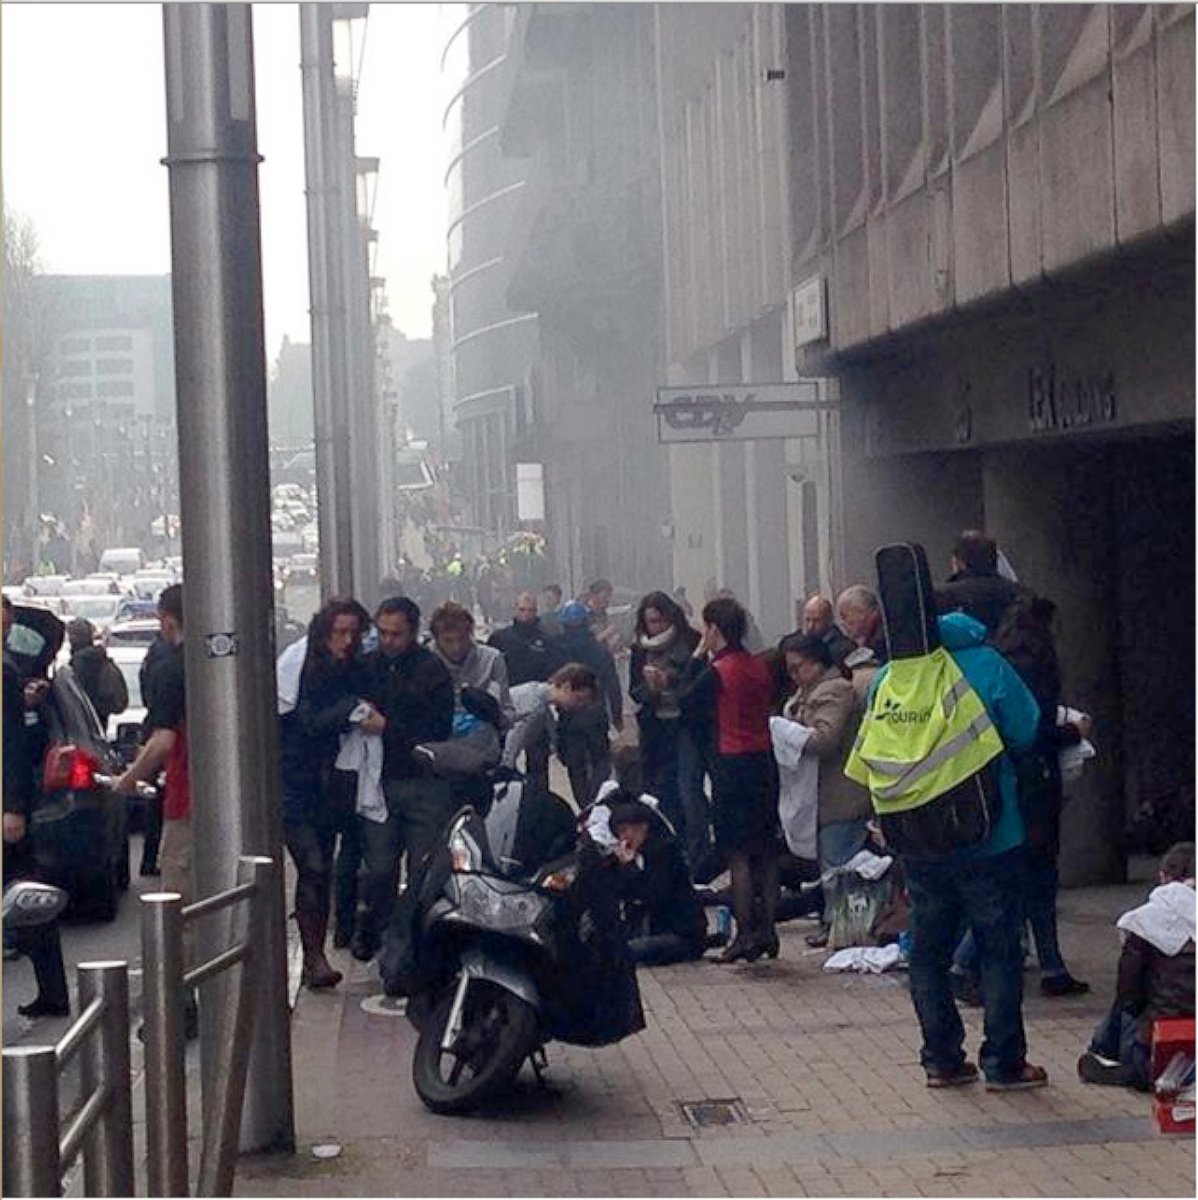 PHOTO: In a photo posted on Instagram, victims of the explosion inside the Maalbeek metro station wait above ground for medical treatment, March 22, 2016.